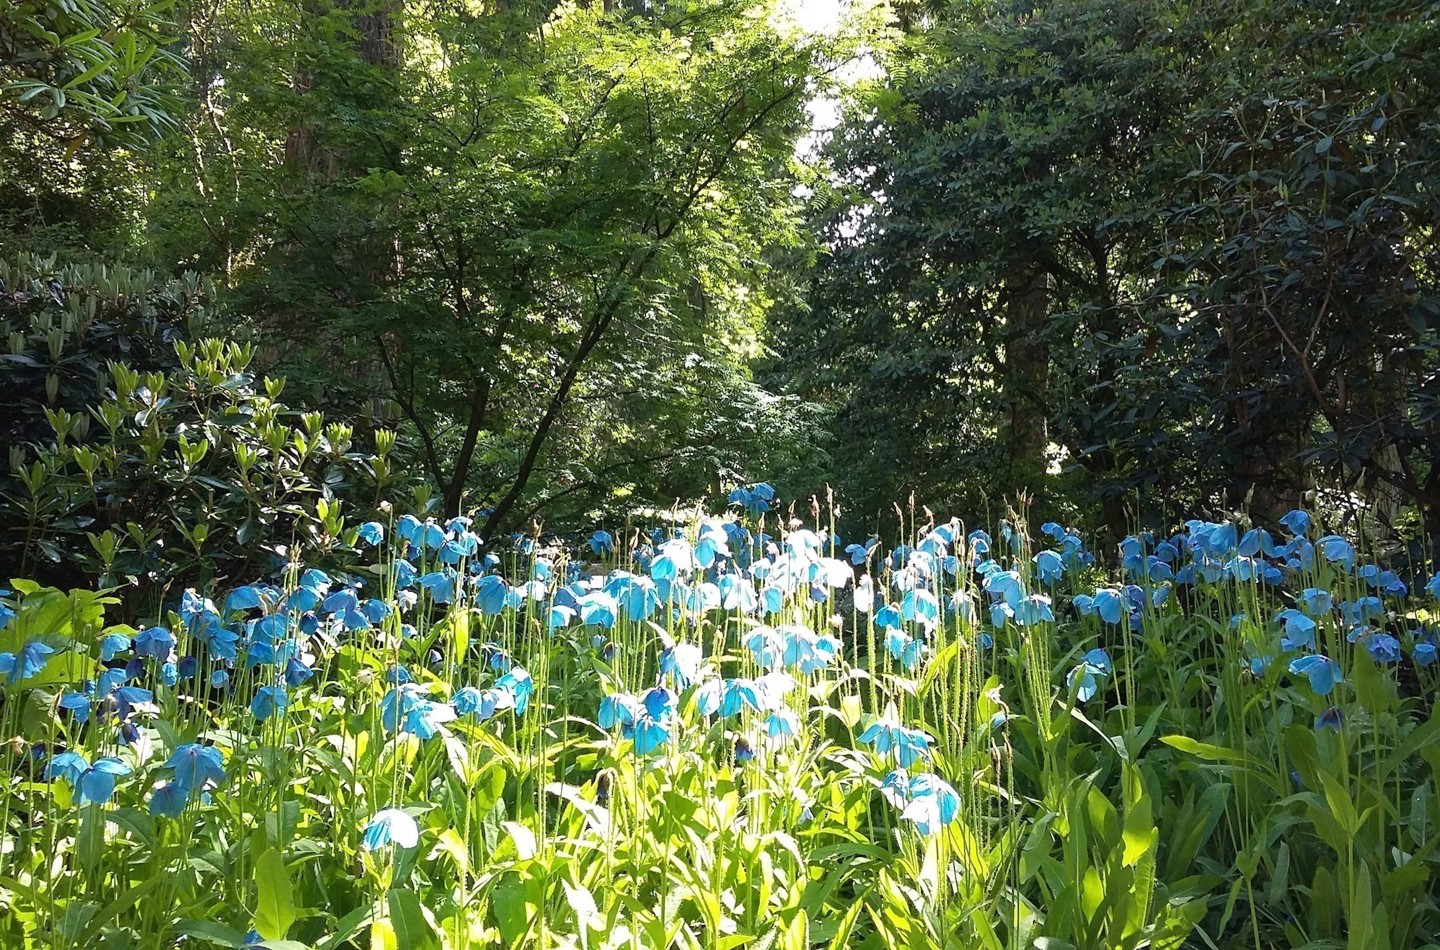 Meconopsis (Himalayan blue poppies) in June, Dawyck